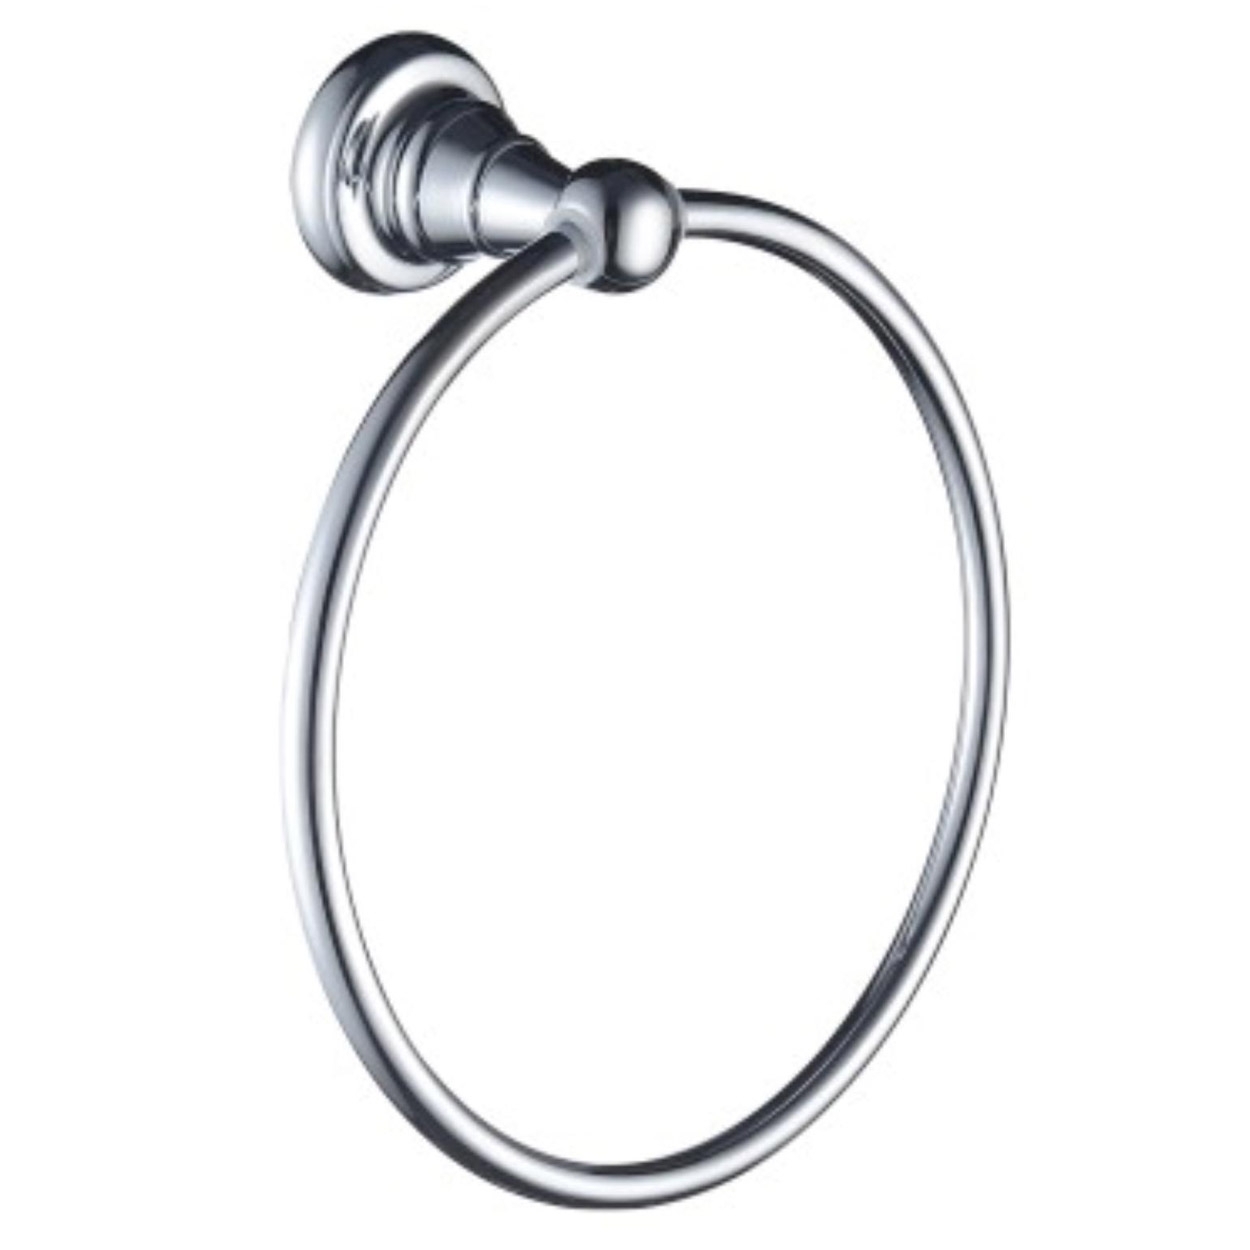 Bristan 1901 Brass Towel Ring, Chrome Plated 